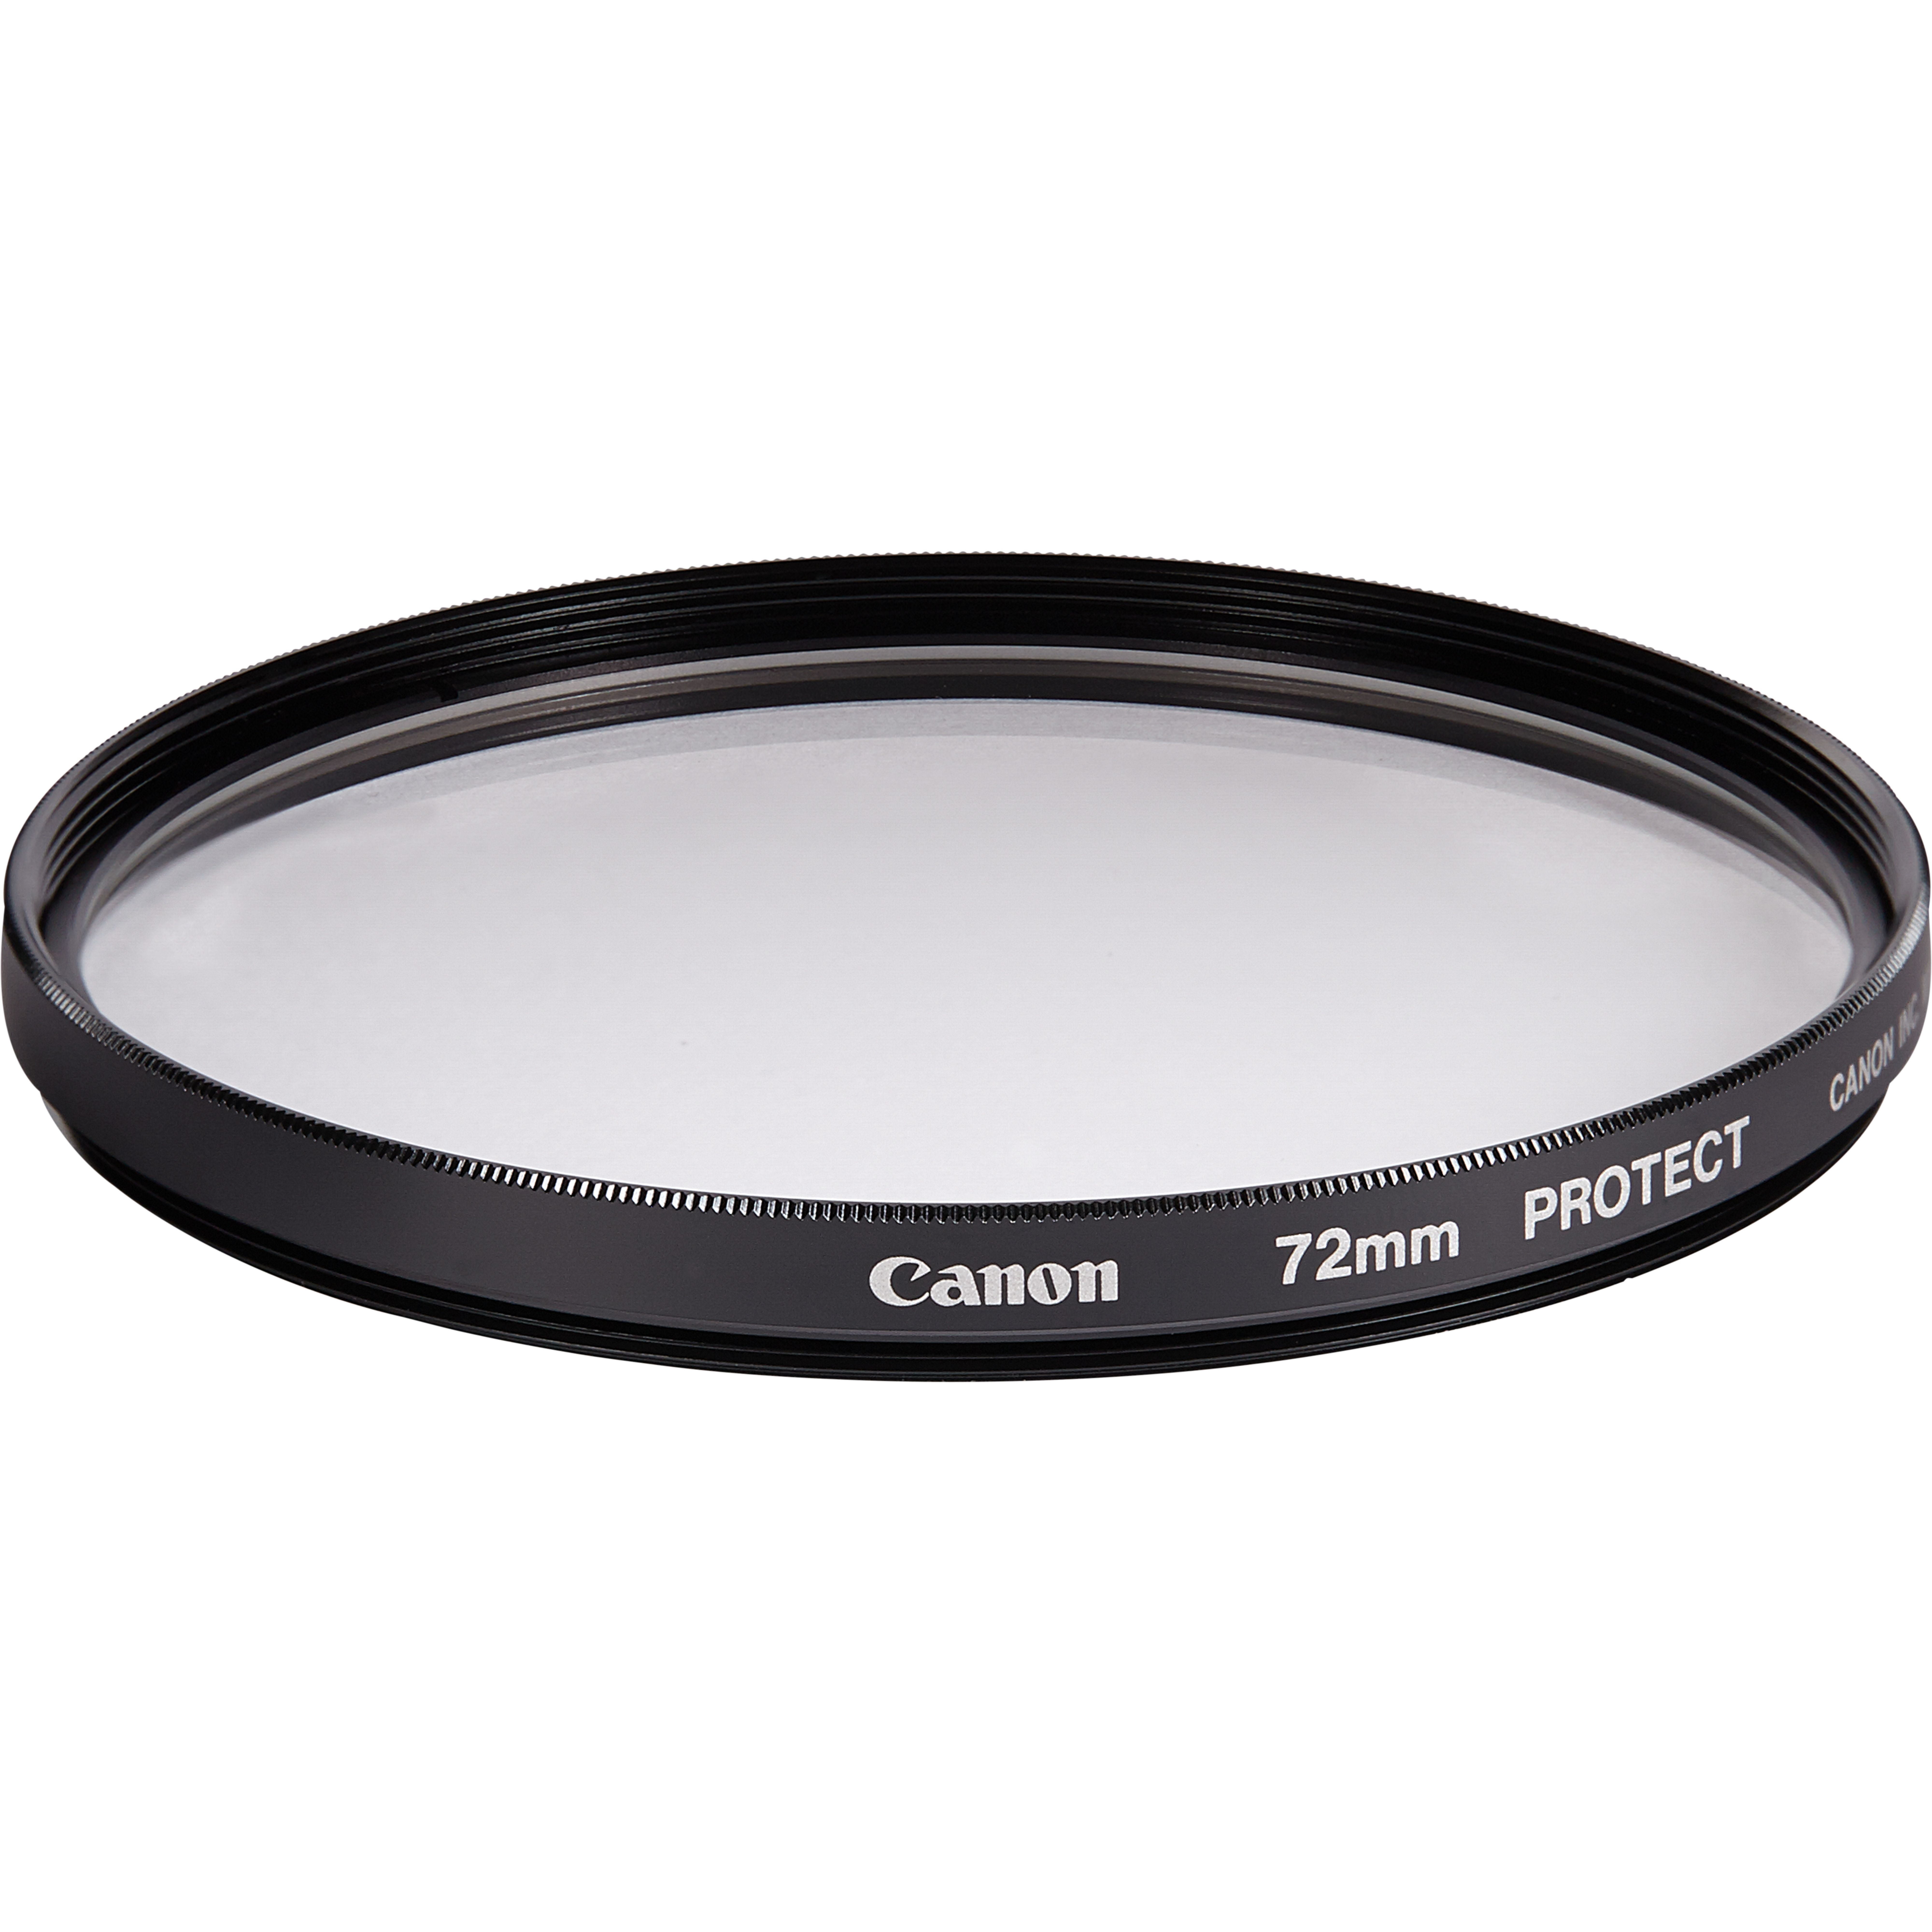 Canon - Filter - protection - 72 mm - for EF, EF-S, TS E